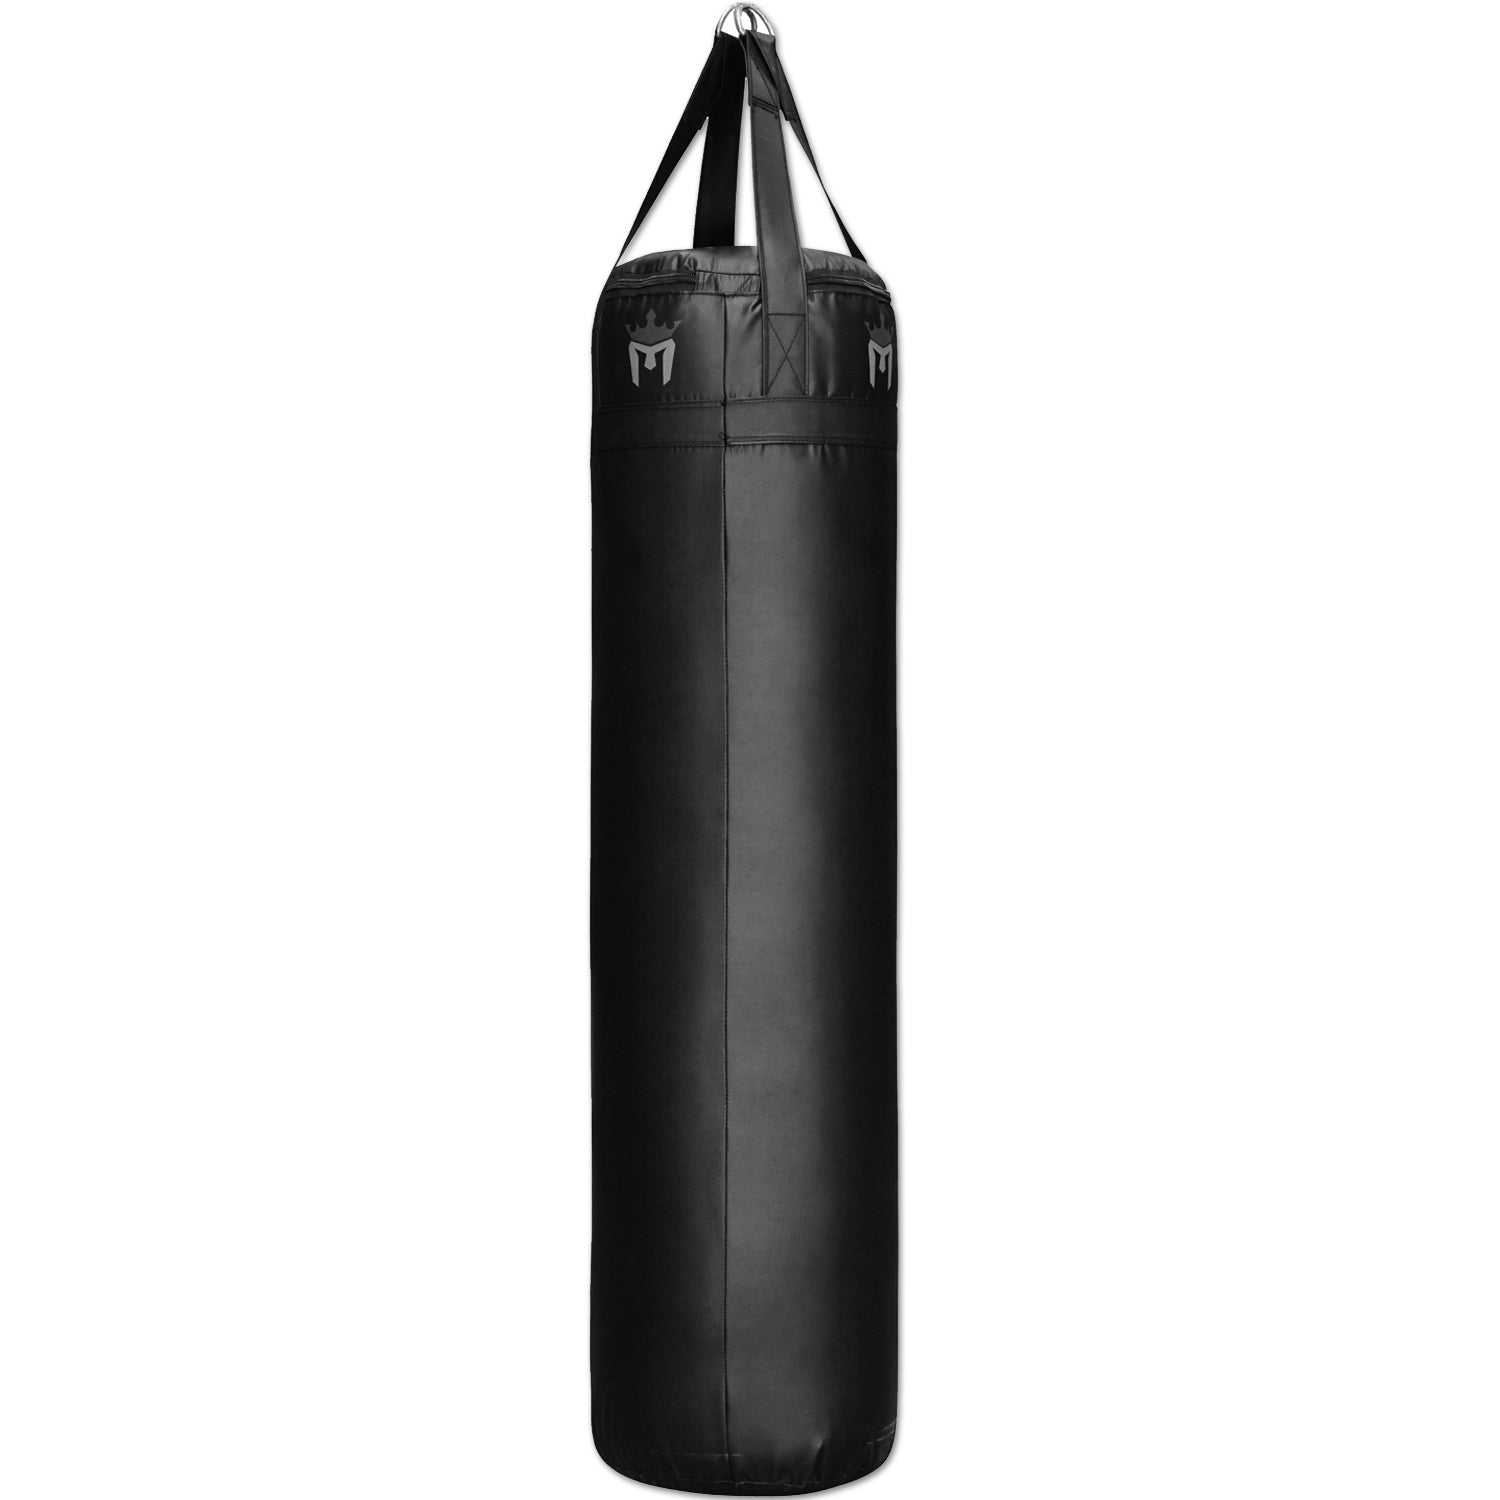 Punching Bags - Boxing - Fight